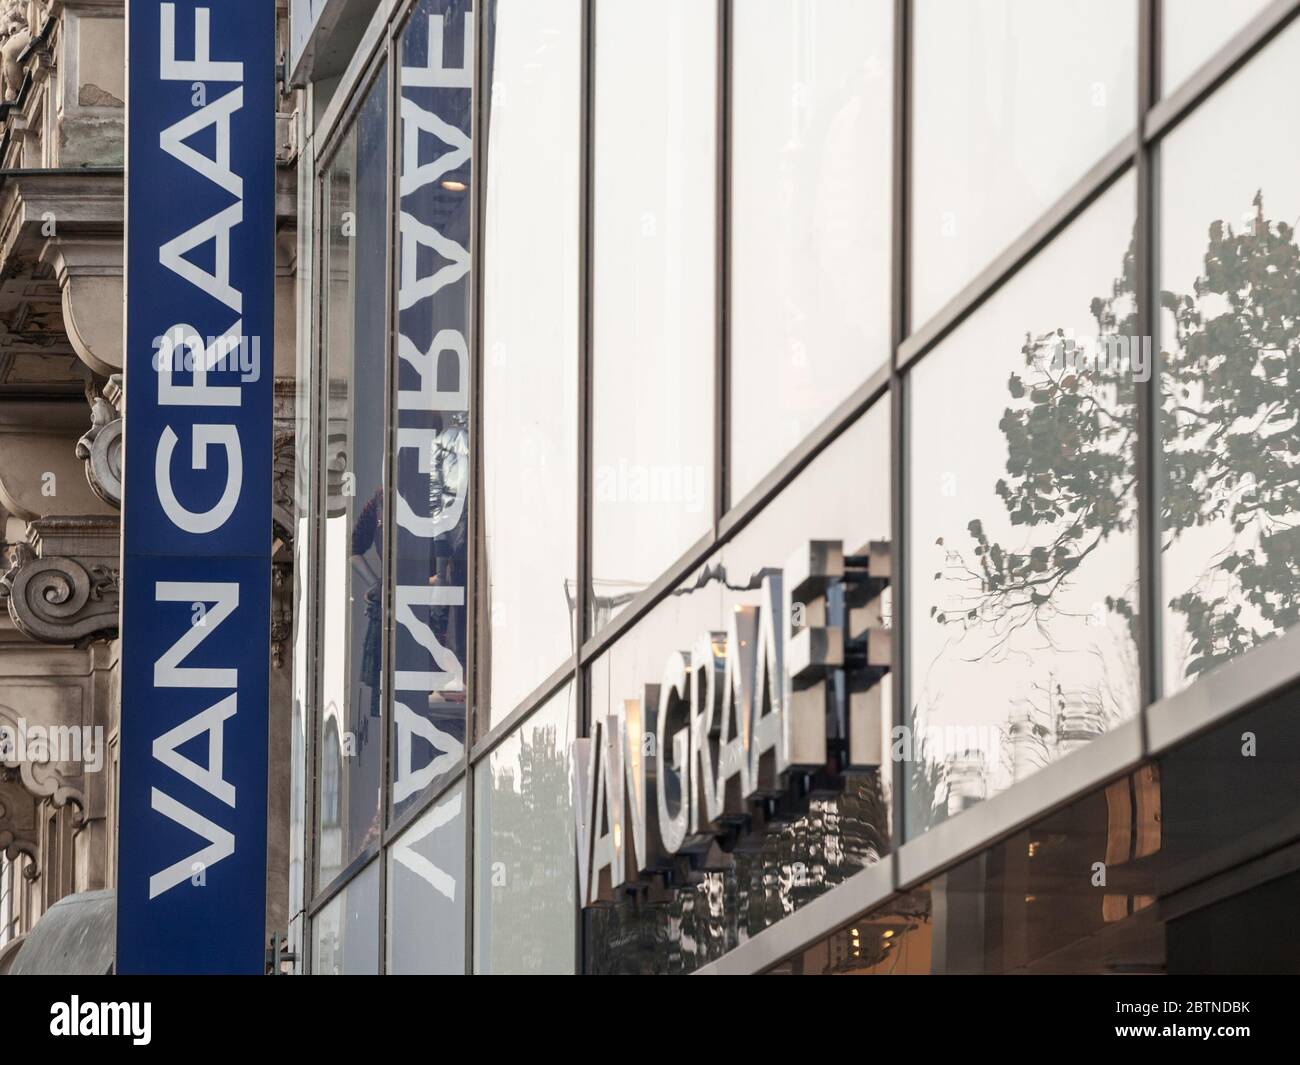 PRAGUE, CZECHIA - OCTOBER 31, 2019: Van Graaf logo in front of their store  for Prague. Peek & Cloppenburg is a German fashion retailer specialized in  Stock Photo - Alamy